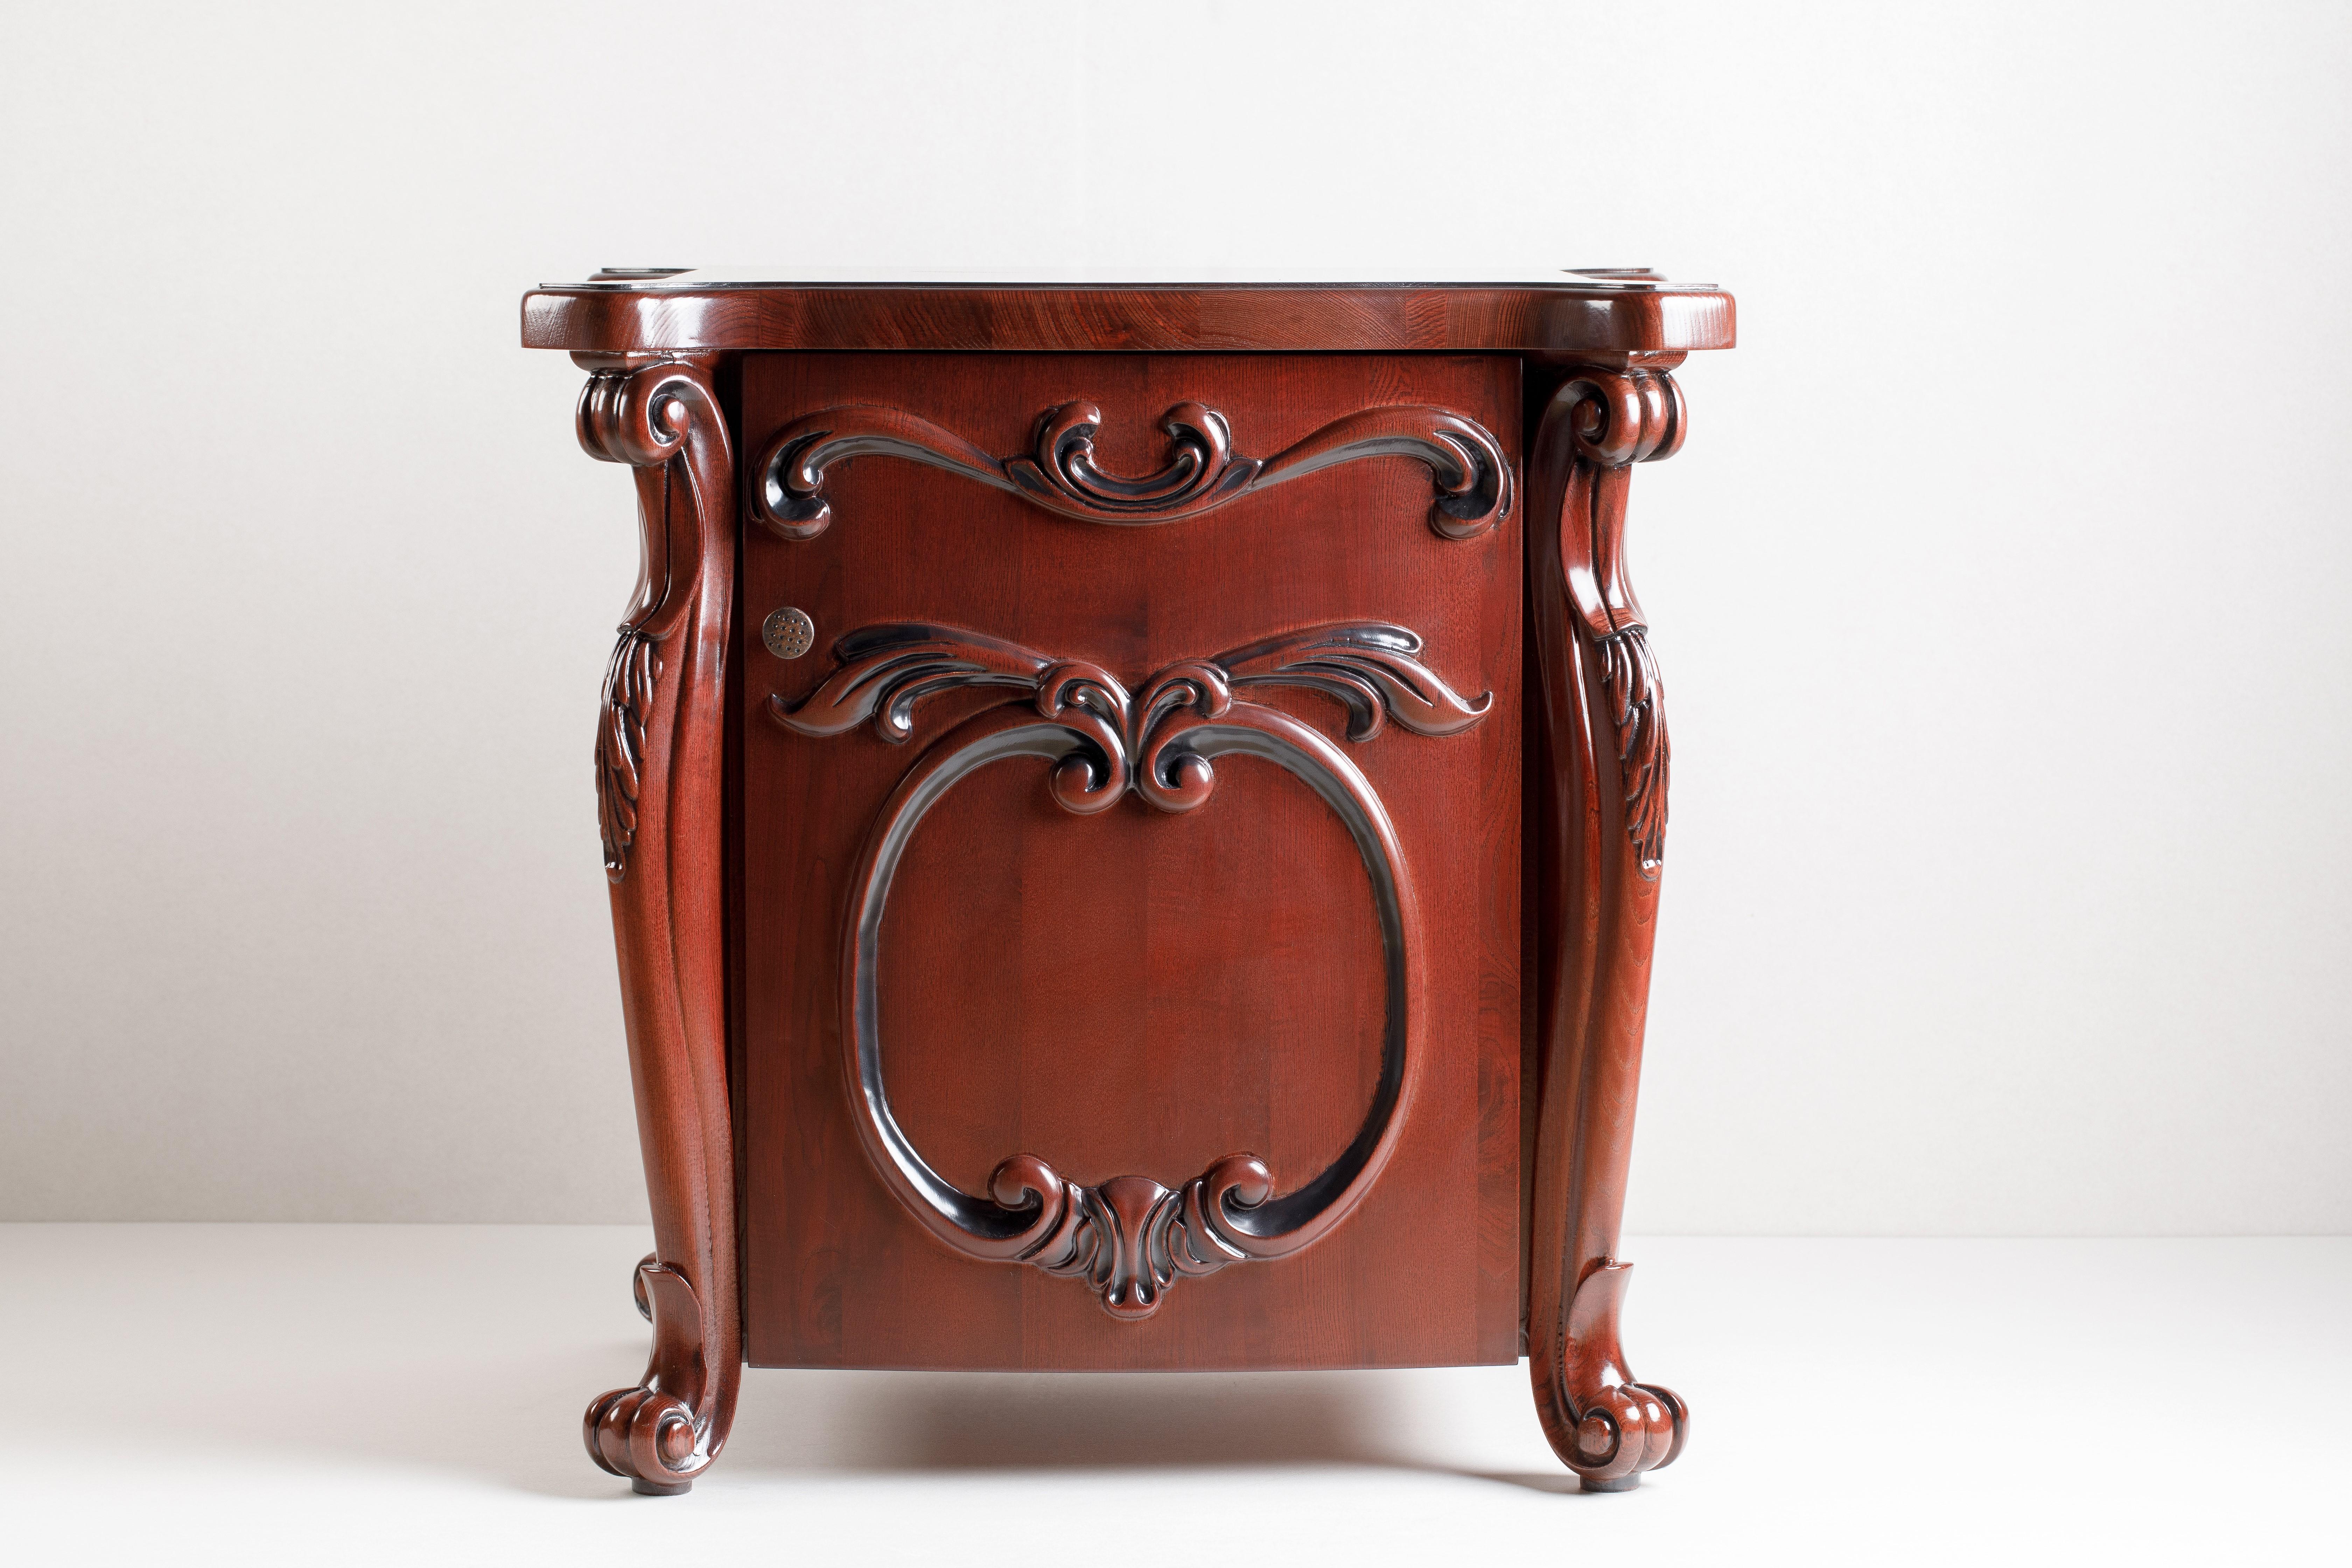 CARVED DOOR NIGHTSTAND
New – not previously owned. Shows absolutely no signs of wear.

Dimensions
H 24.80 in. x W 24.80 in. x D 21.65 in.
H 63 cm x W 63 cm x D 55 cm

DATE OF MANUFACTURE 2019

The finest natural hard wood – ASH

The Rococo style is